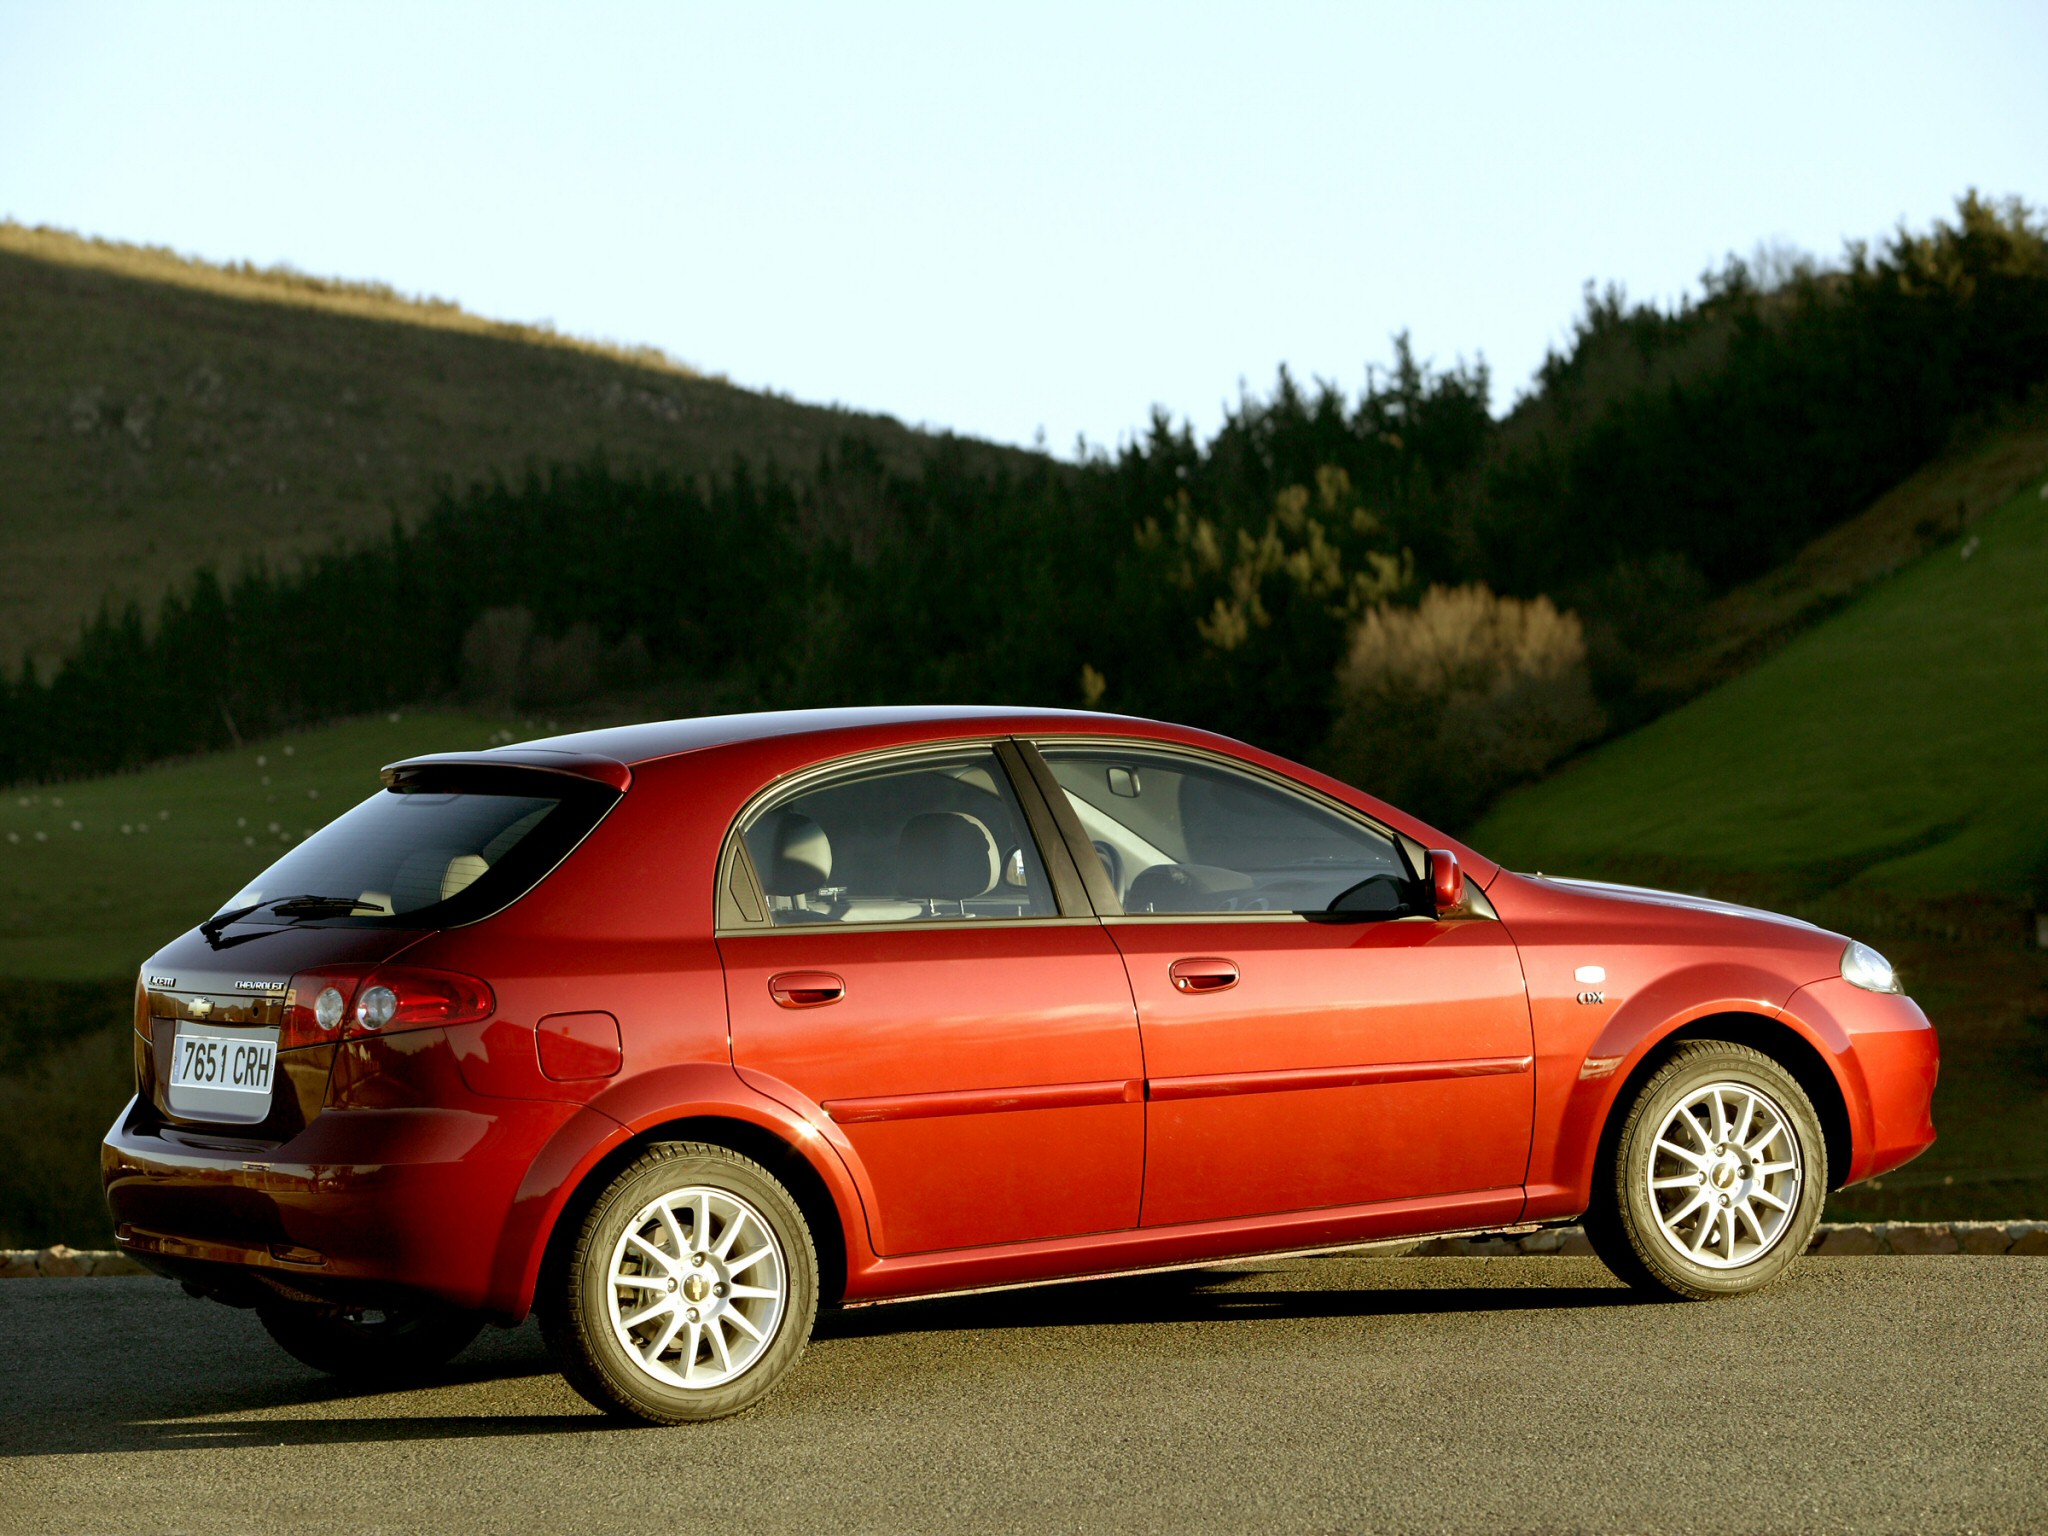 Car in pictures car photo gallery » Chevrolet Lacetti